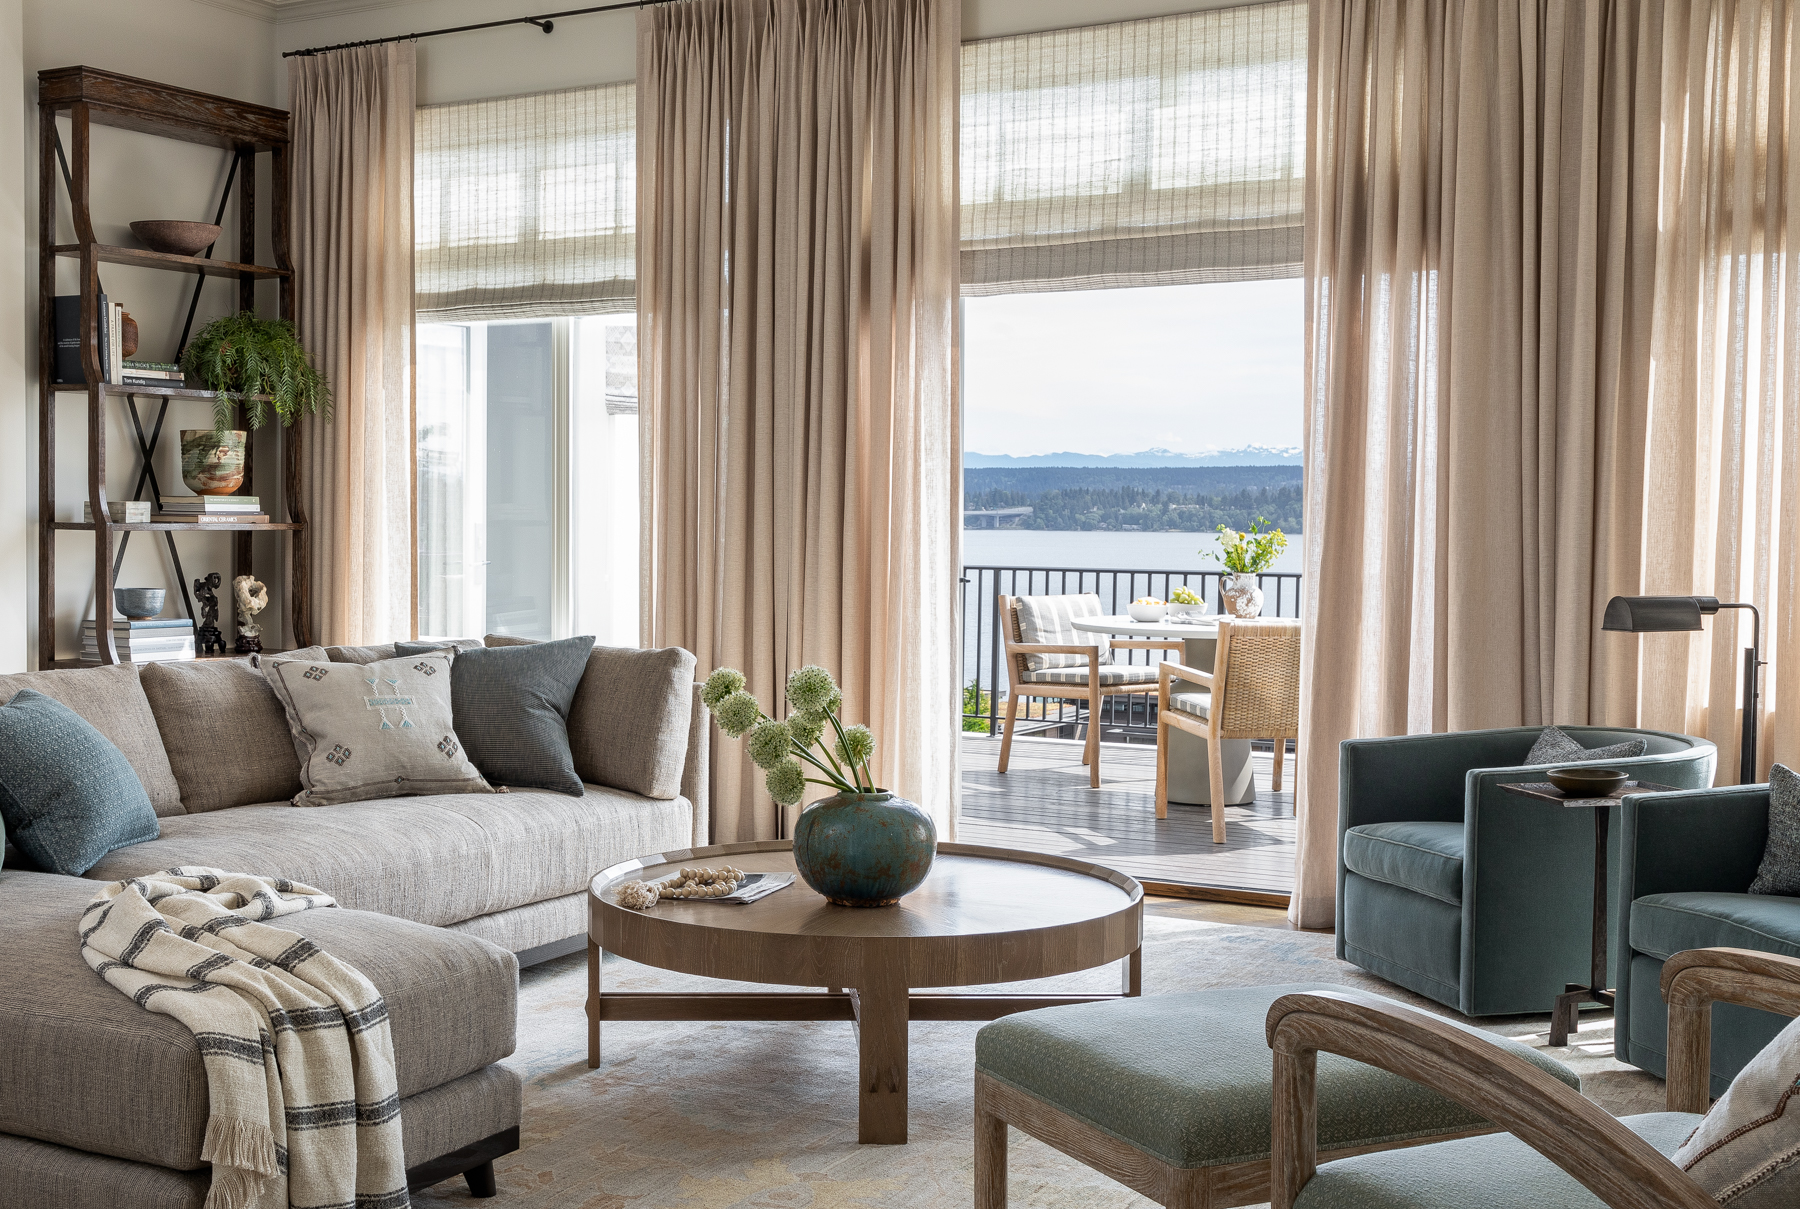 The living room features warm woods, cool gray and blue upholstery, and a view of Lake Washington. A deep brown bookshelf adds a touch of masculine energy to the light, airy space.